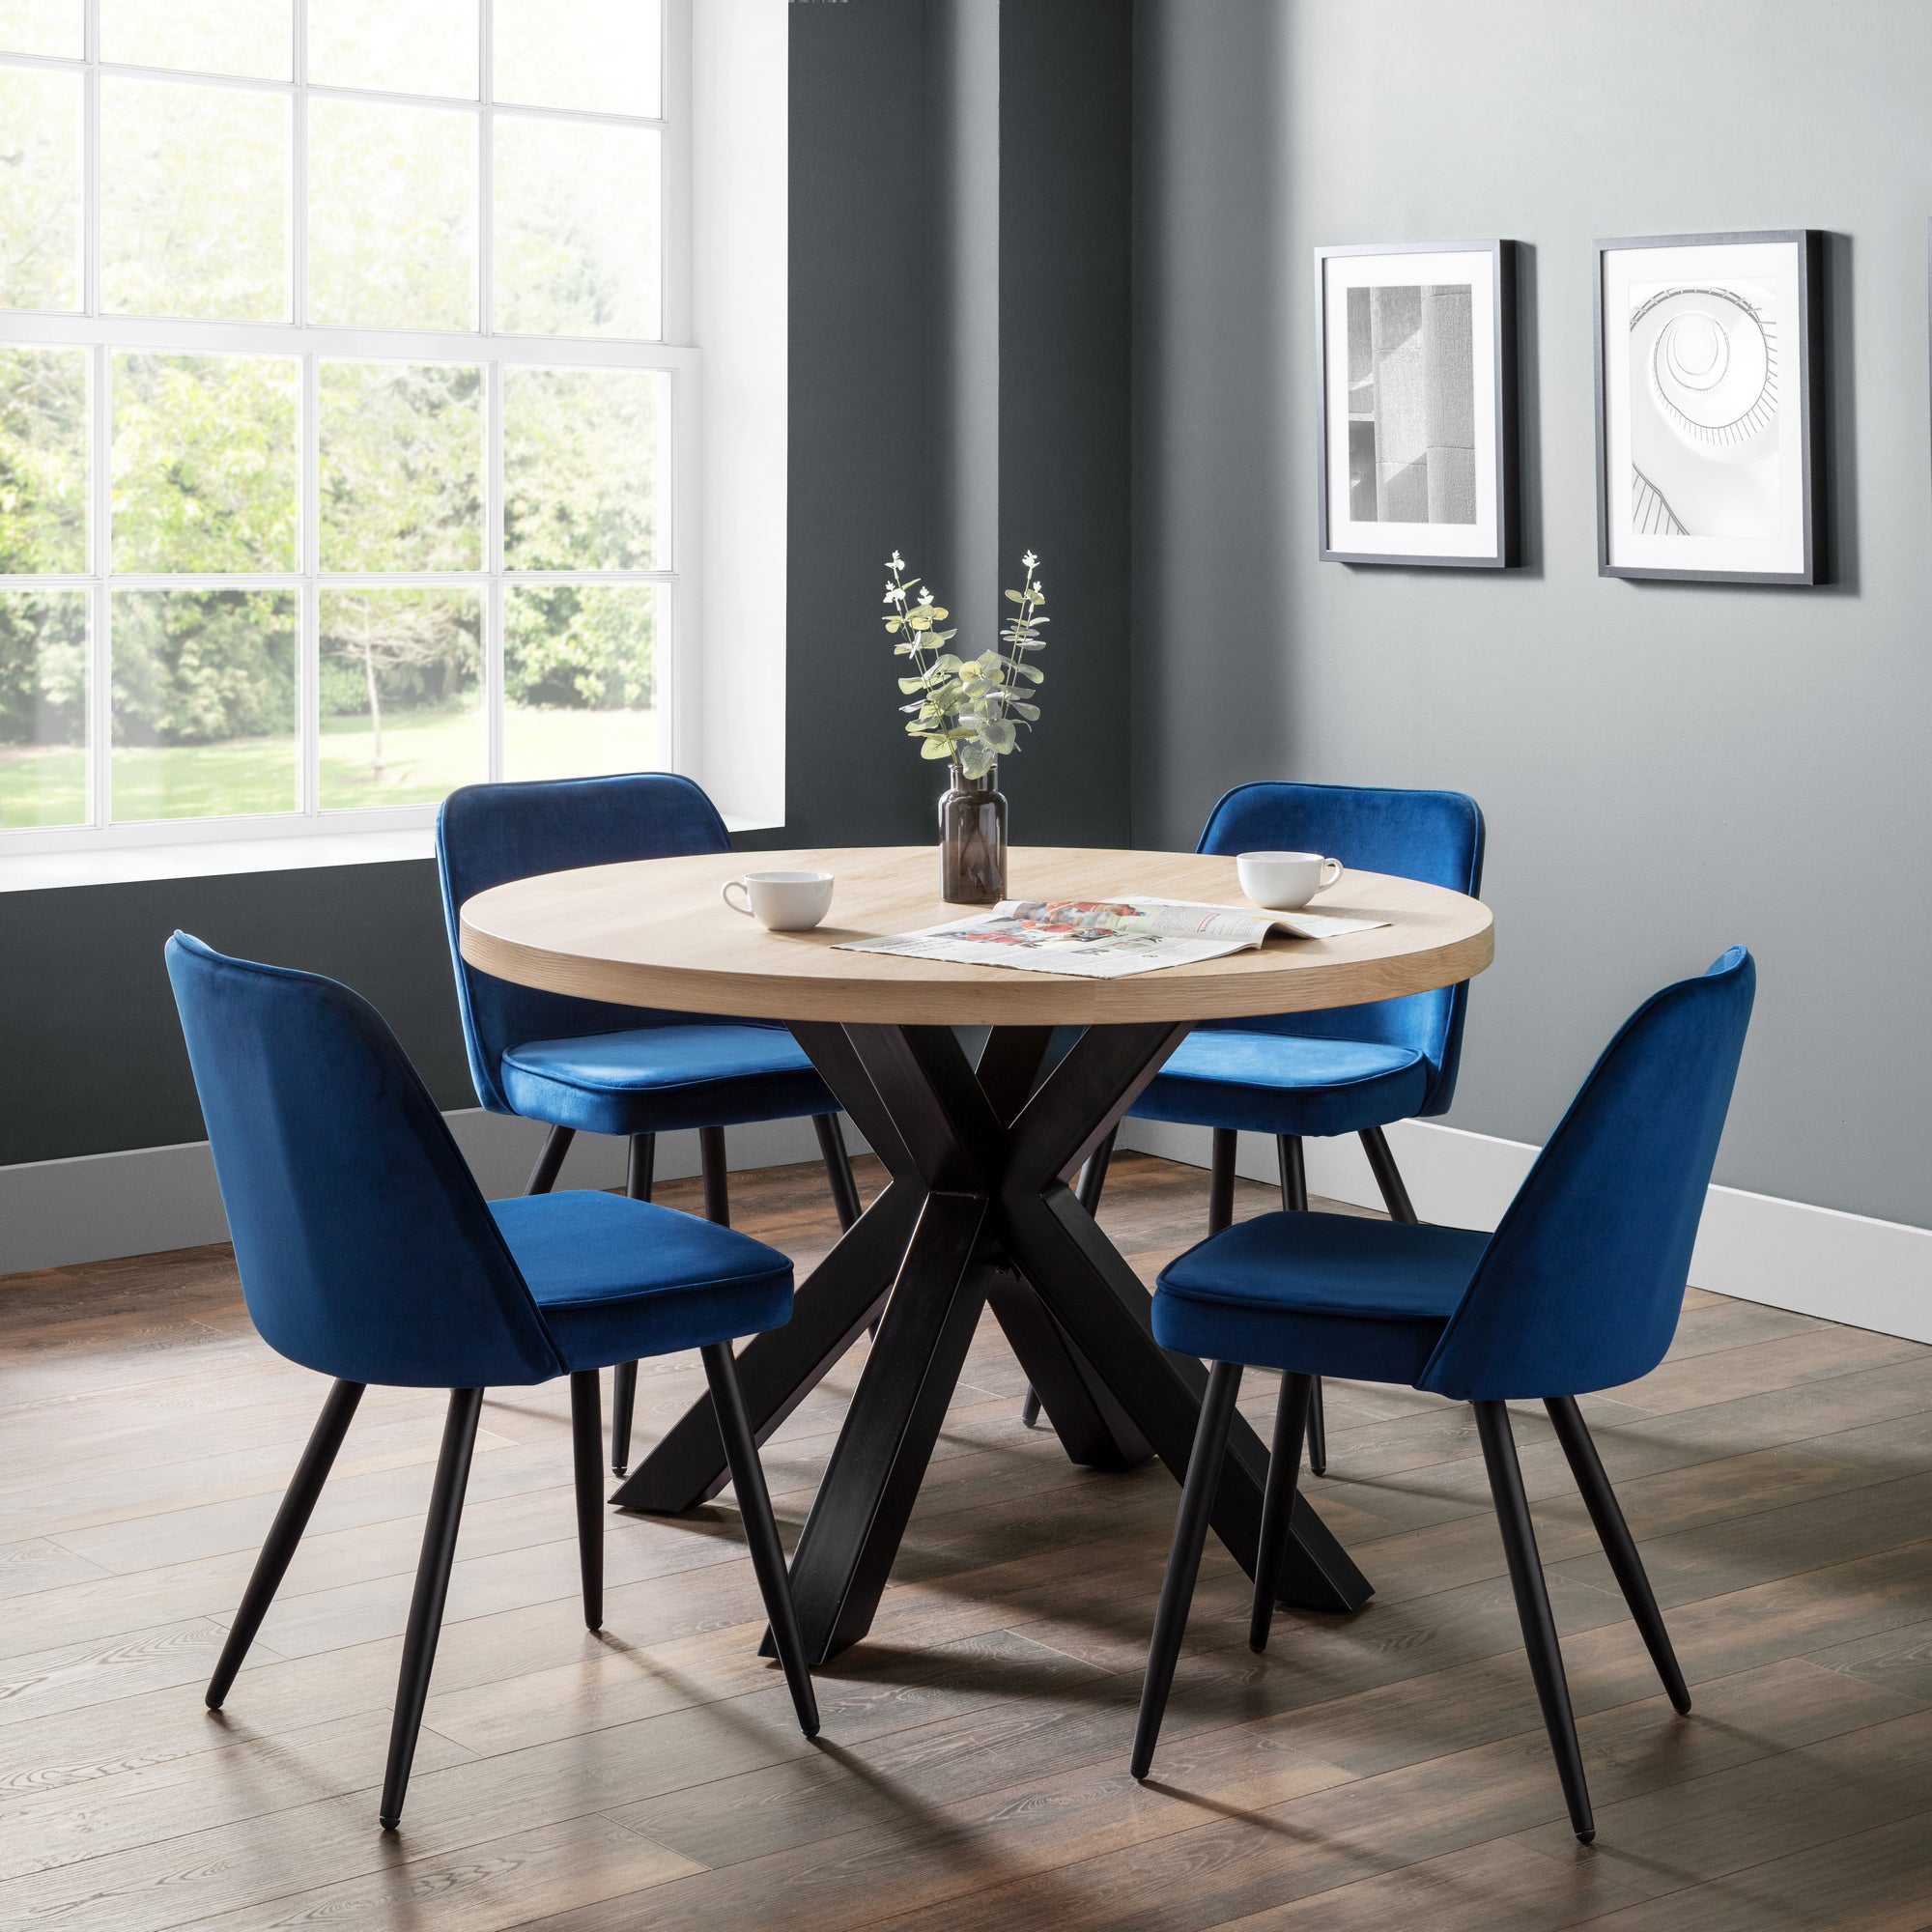 Berwick Round Dining Table With 4 Burgess Chairs Blue